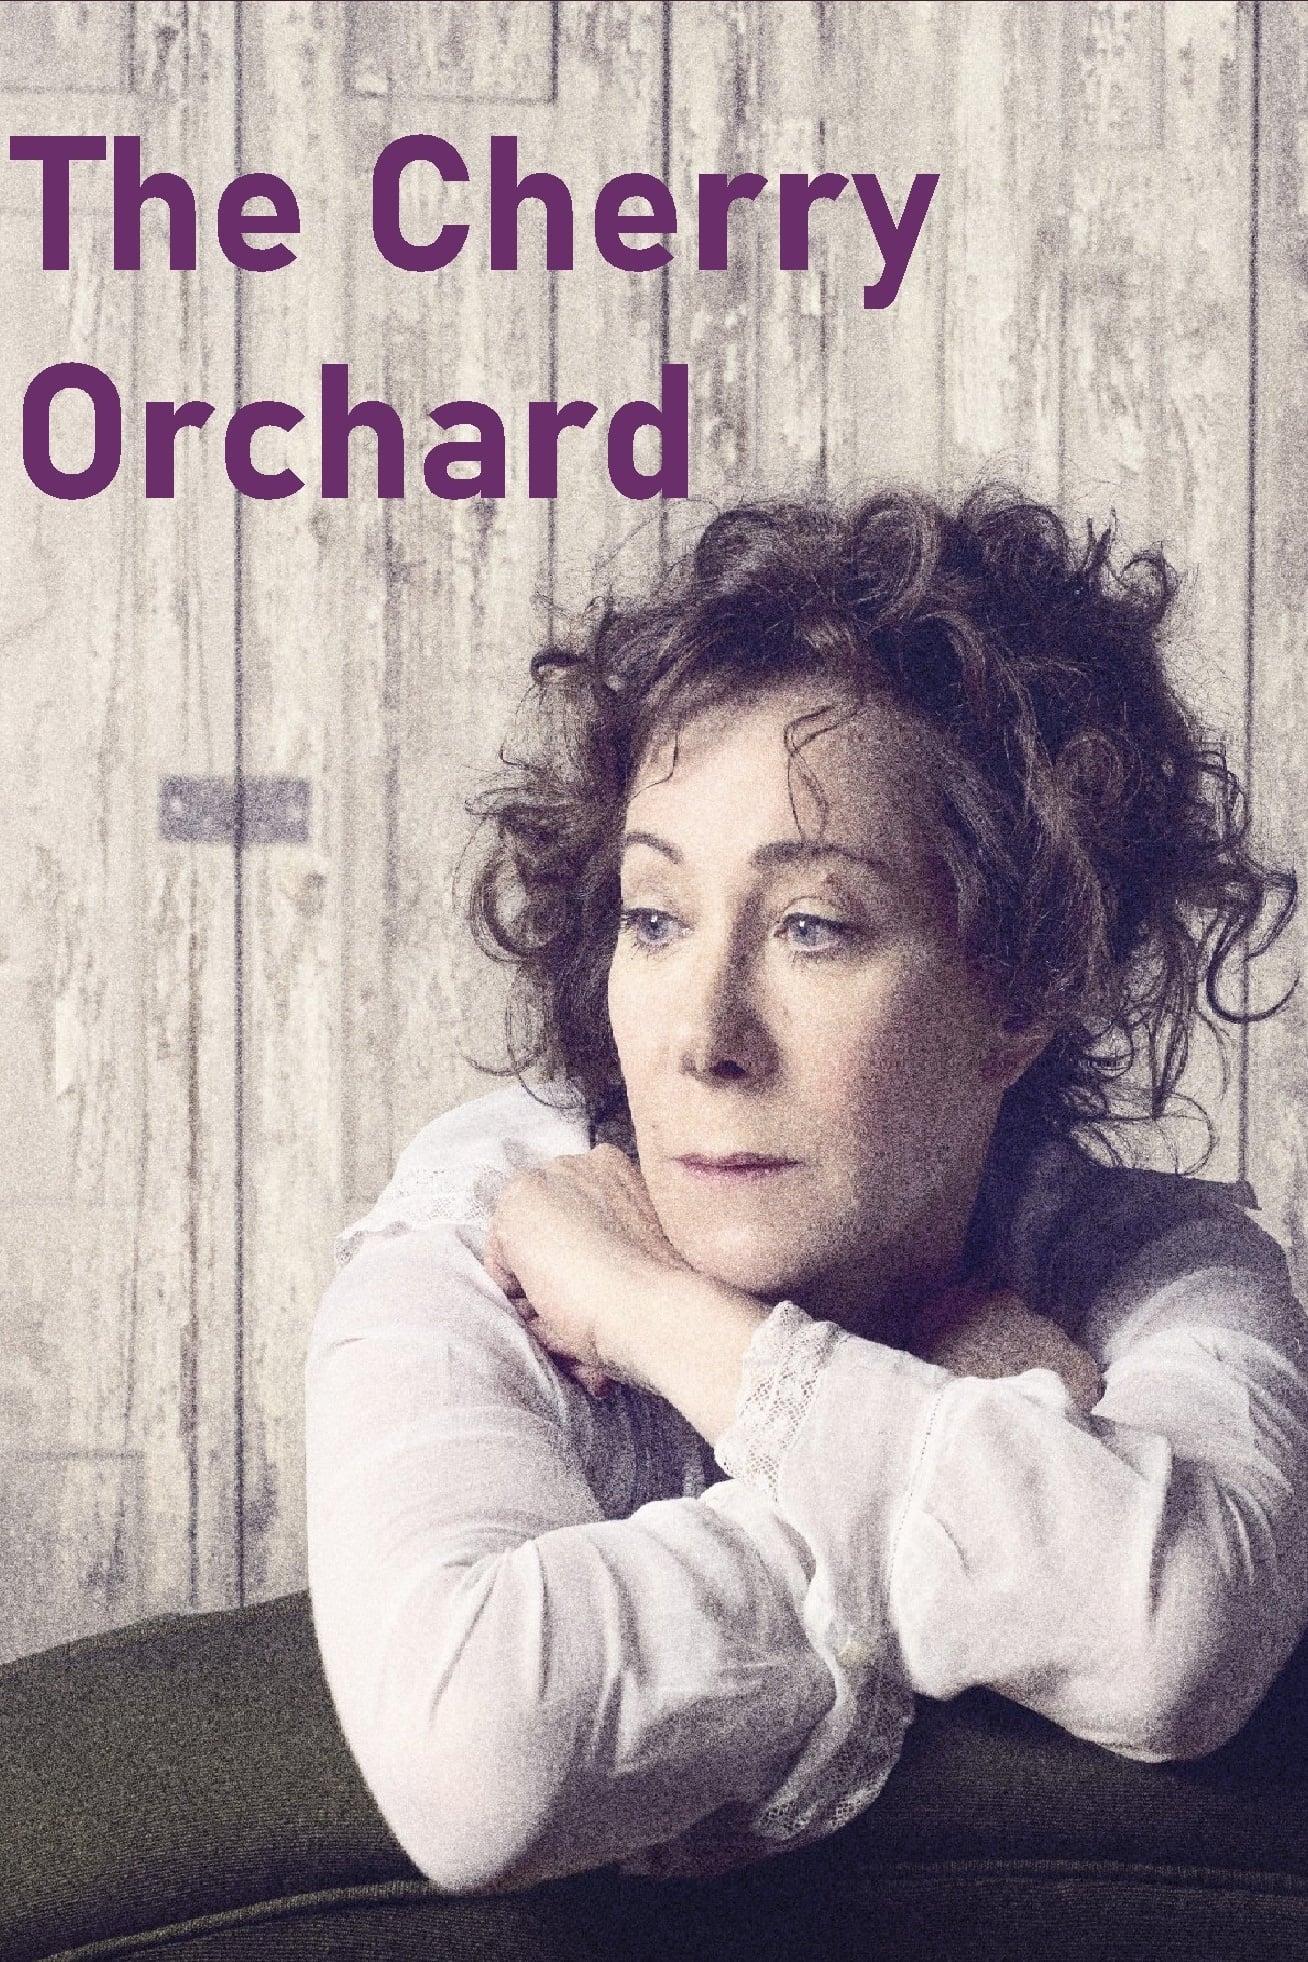 National Theatre Live: The Cherry Orchard